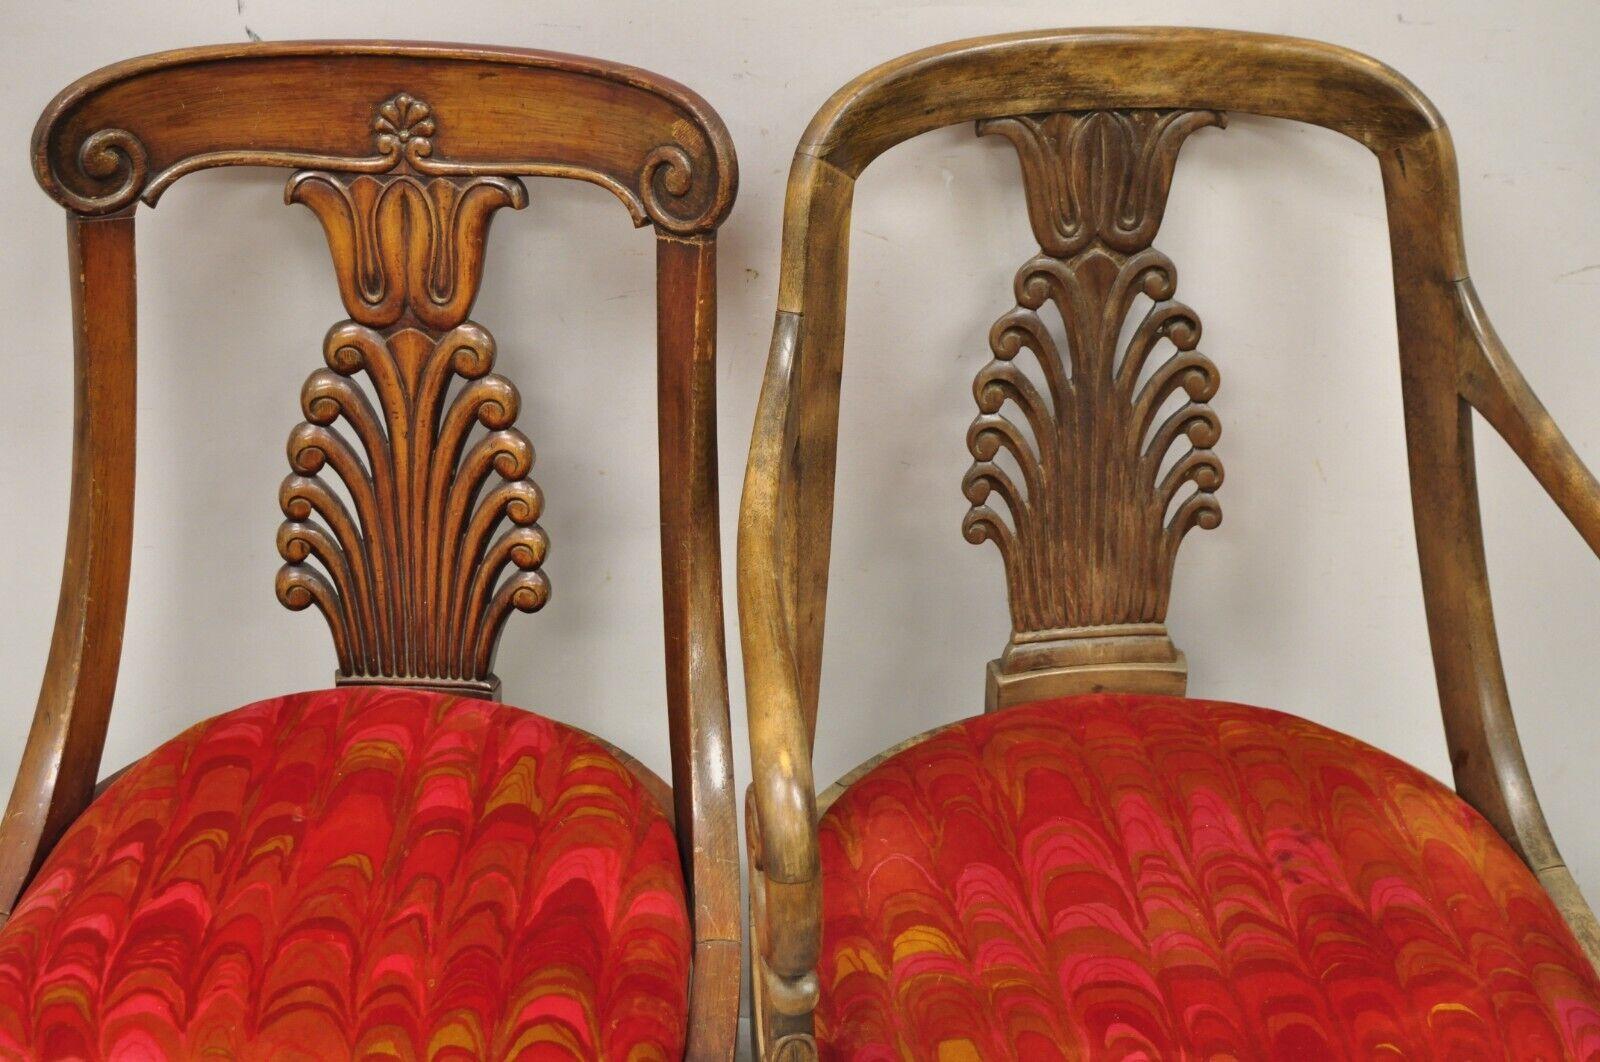 20th Century Vintage Regency Style Plume Carved Walnut Saber Leg Dining Chairs - Set of 6 For Sale